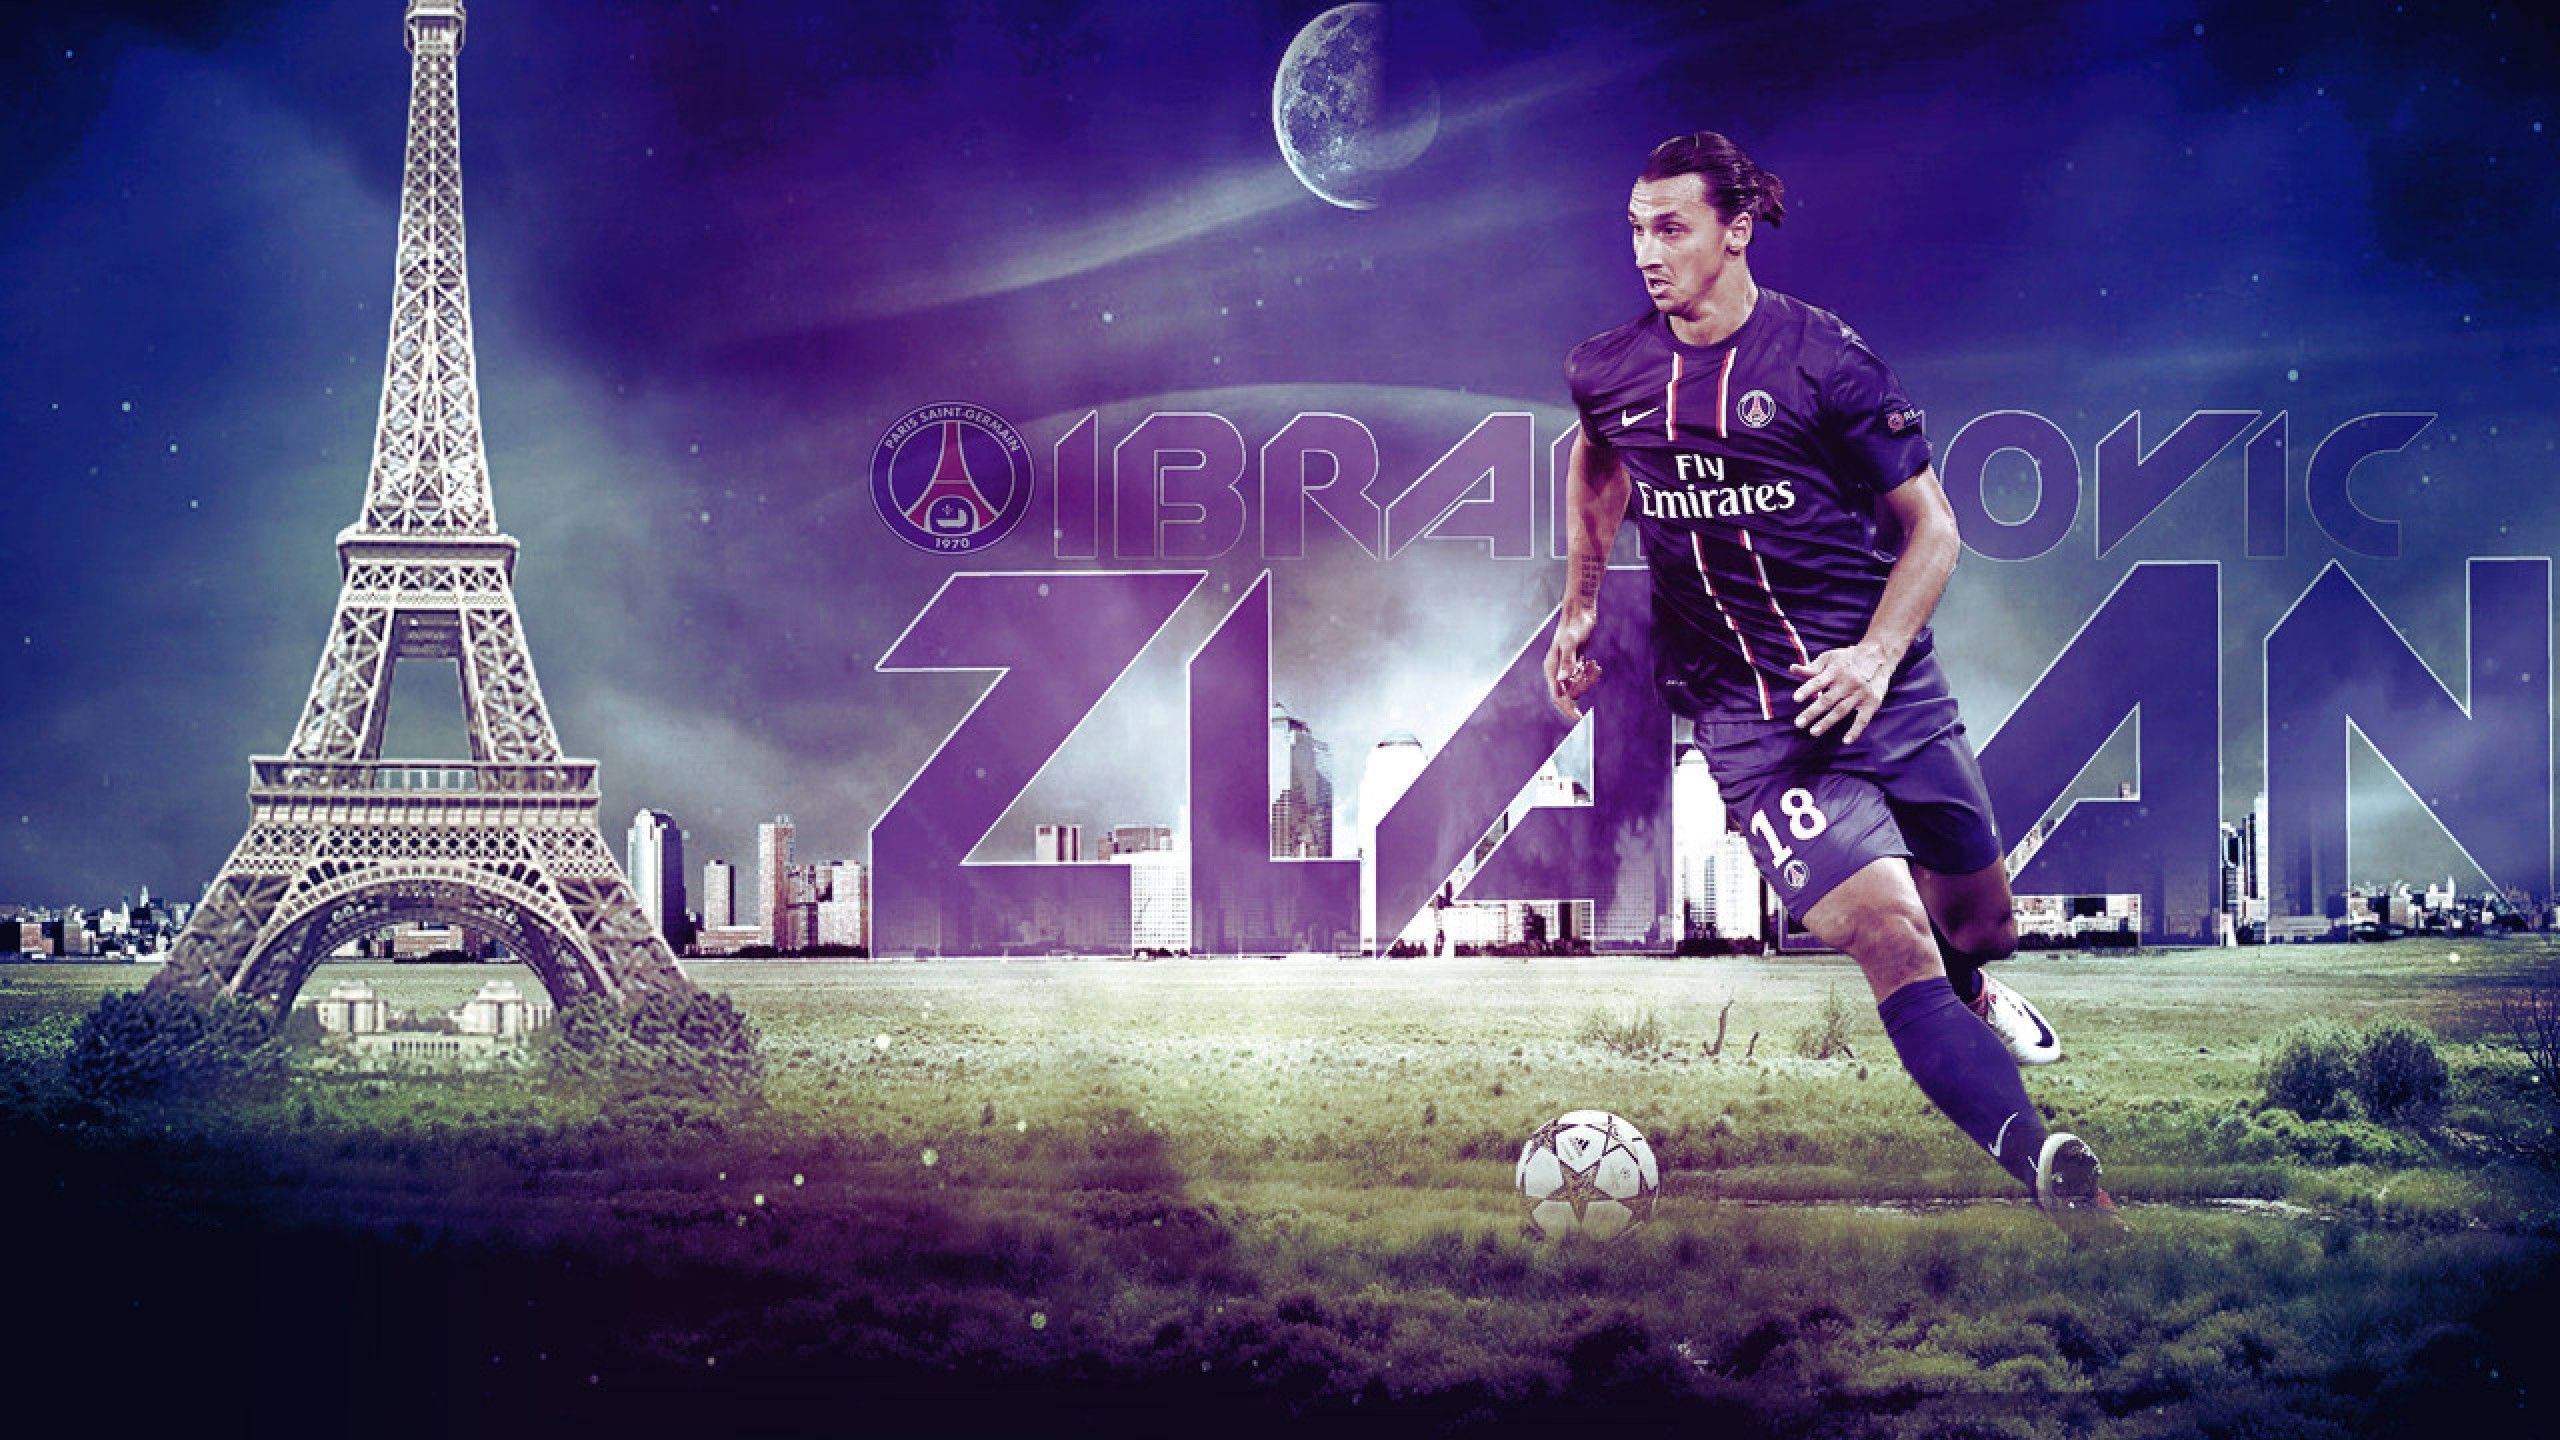 The forward of PSG Zlatan Ibrahimovic is made in paris wallpapers ...